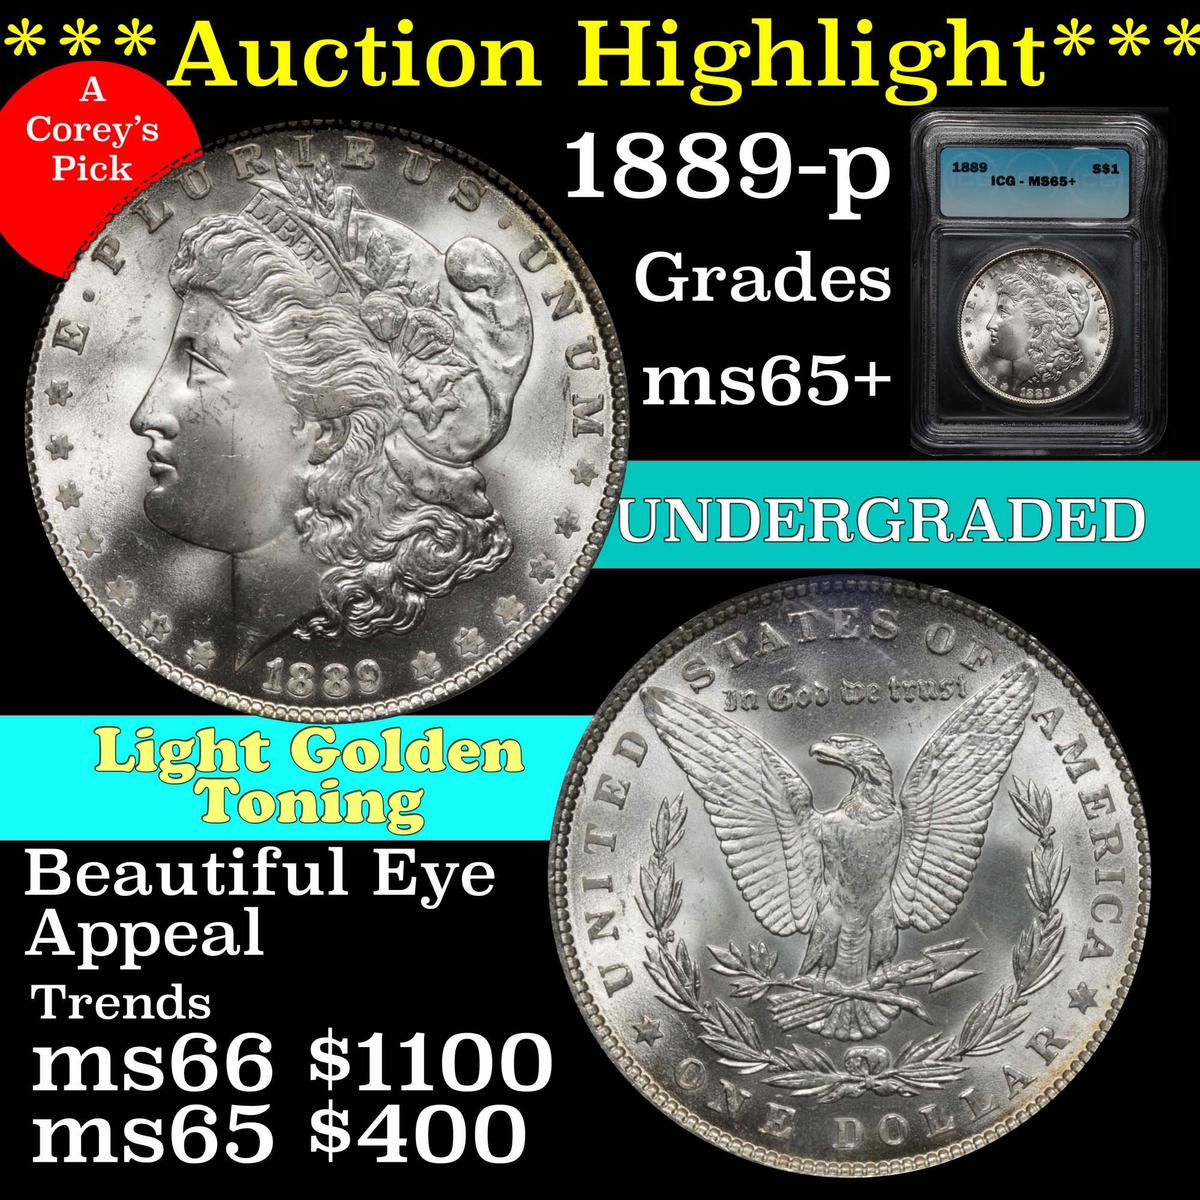 **Auction Highlight** Beautiful eye appeal 1889-p Morgan $1 spectacular luster Graded ms65+ ICG (fc)